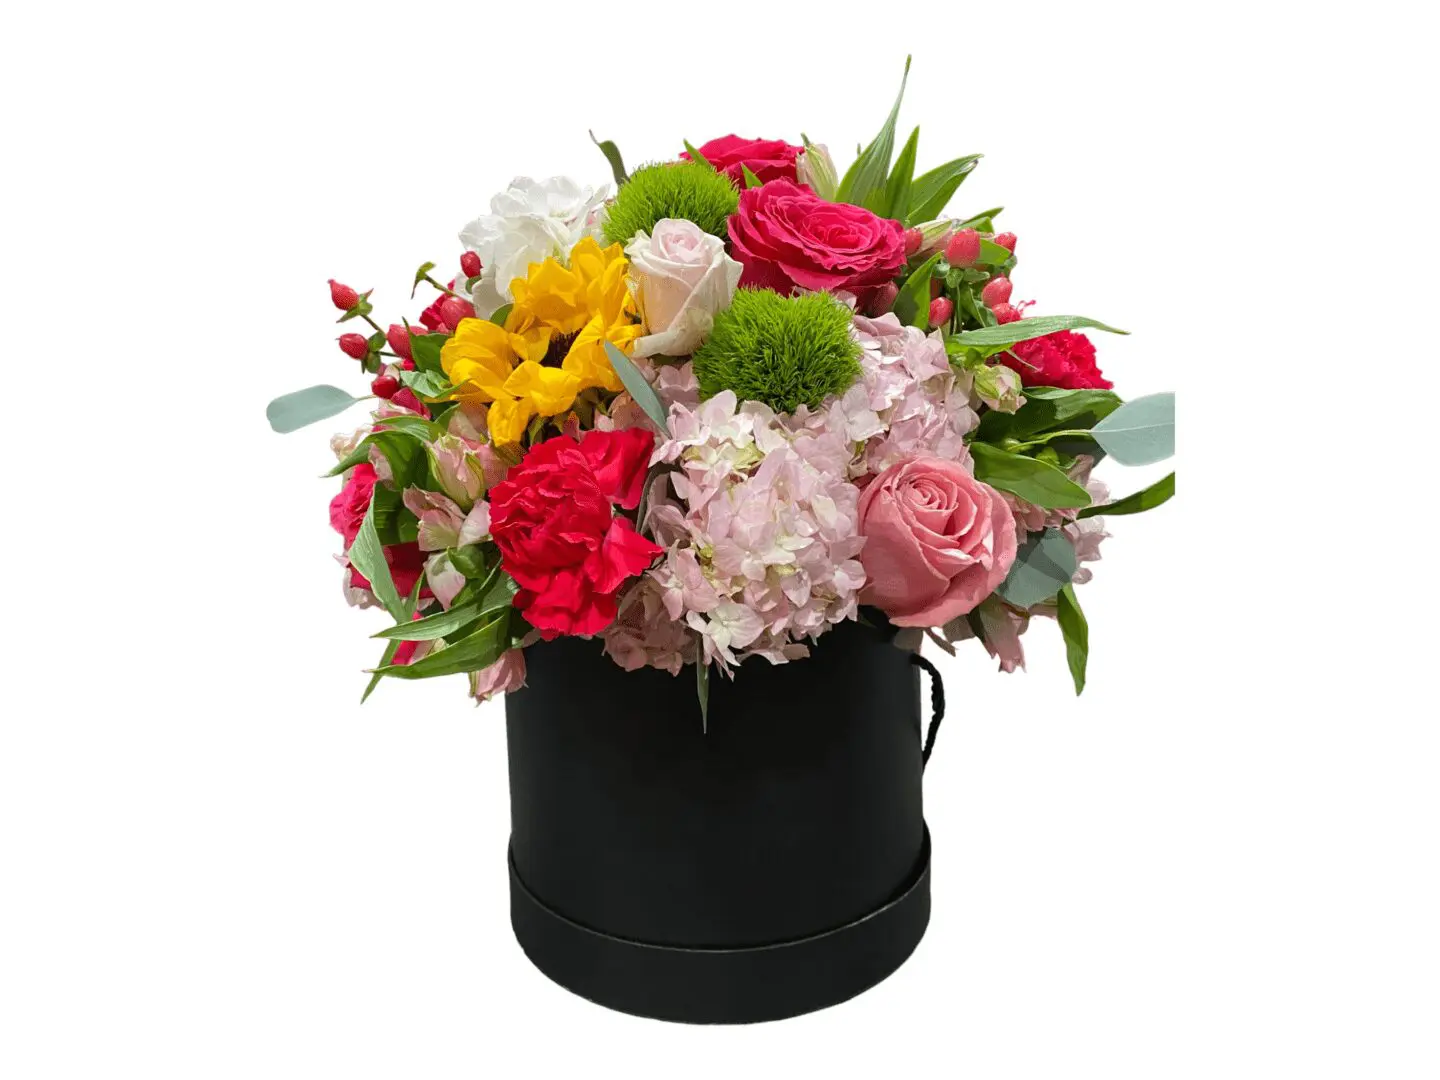 Carolines black box with colorful flowers